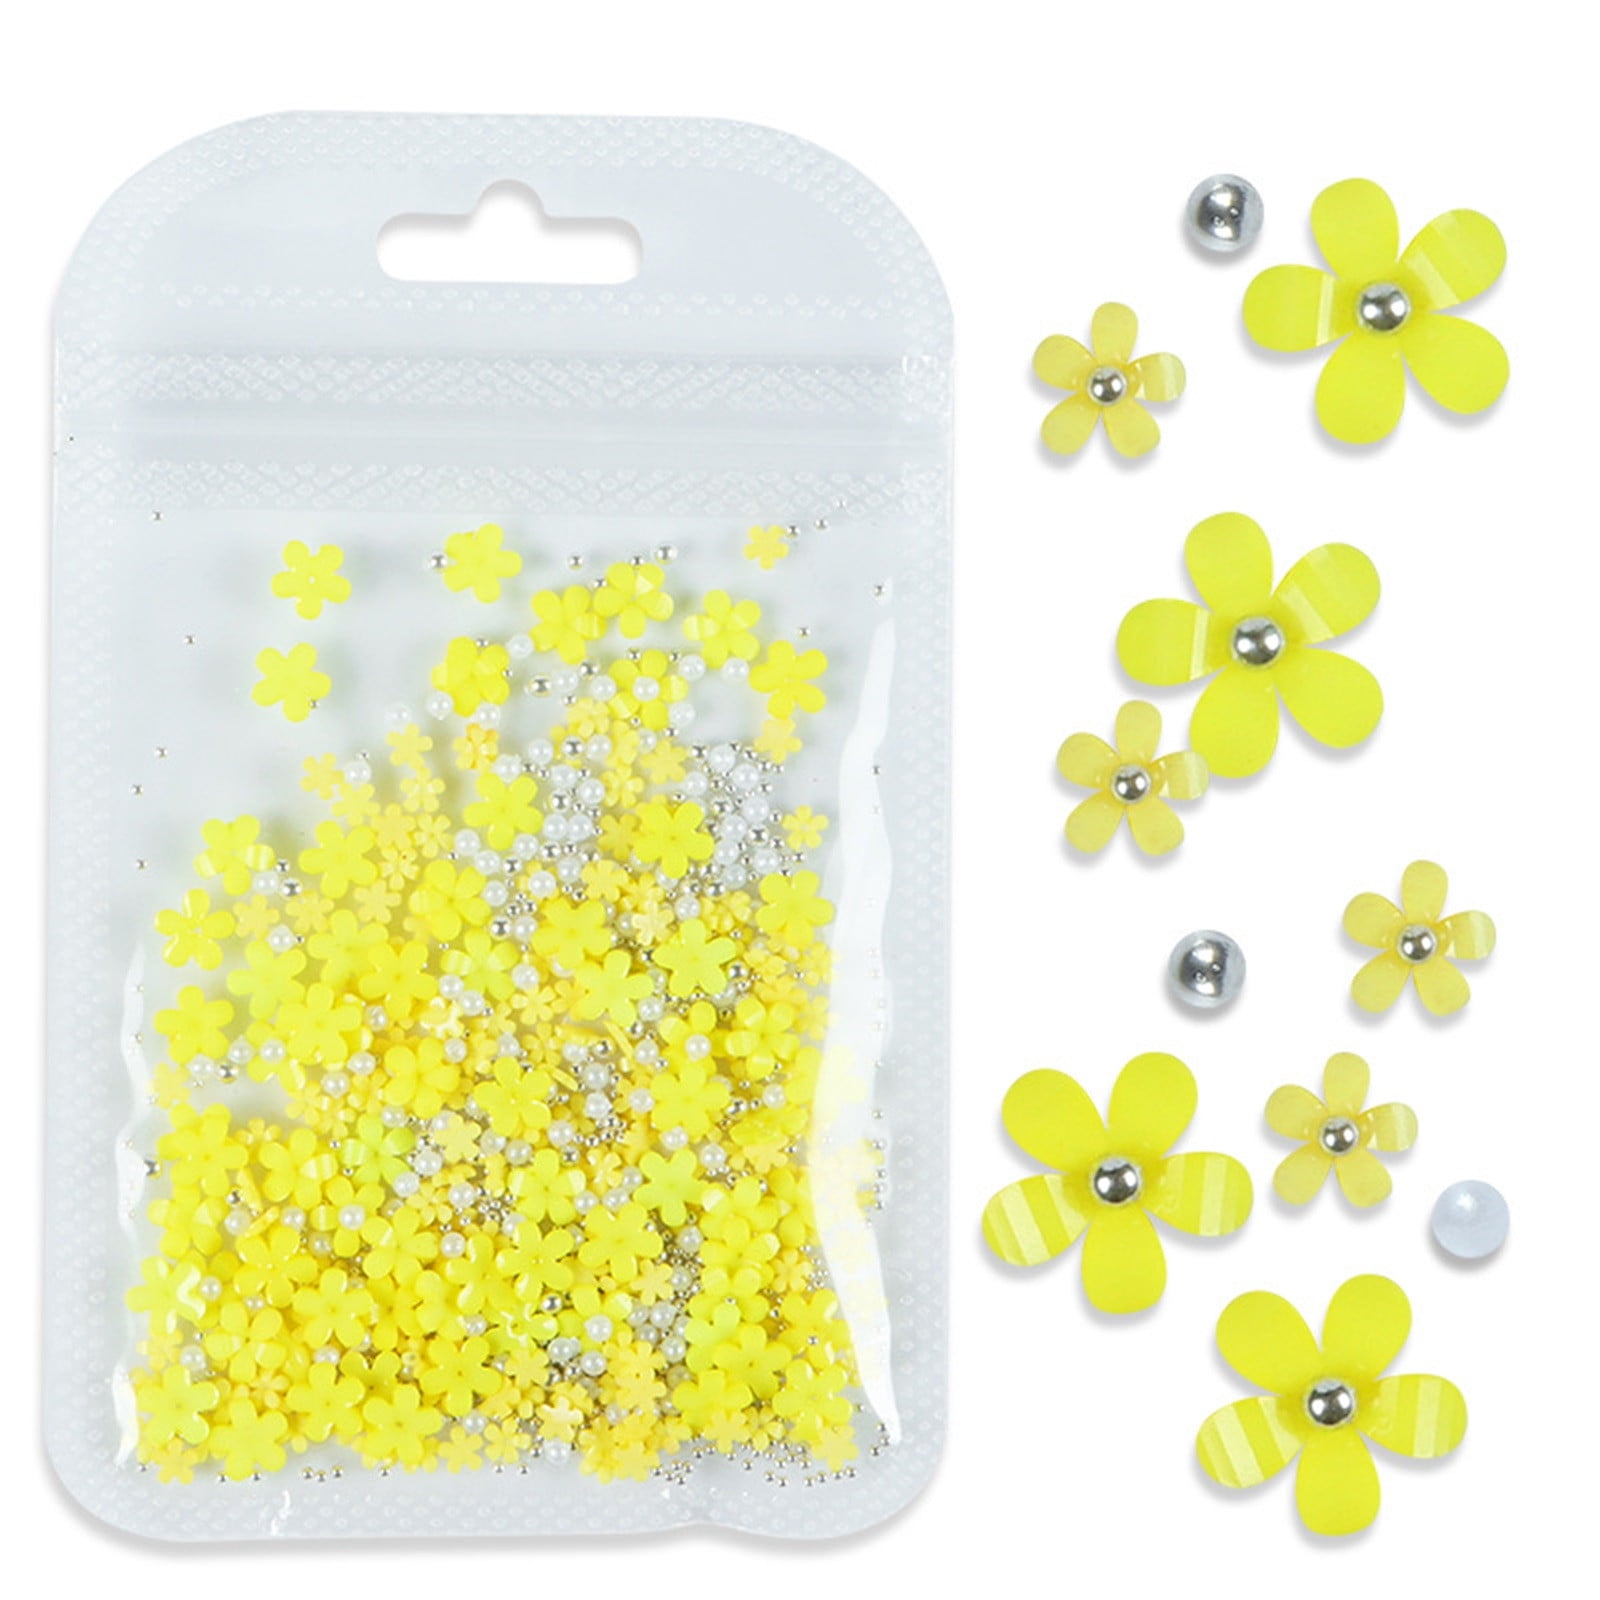 YZHM 3D Flower Nail Art Charms, 5 Petal Flowers Nail Rhinestones Kit 3D  Crystal Nail Pearls Flat Design Acrylic Nail Art Studs Manicures Nail  Accessories for Women Girls 